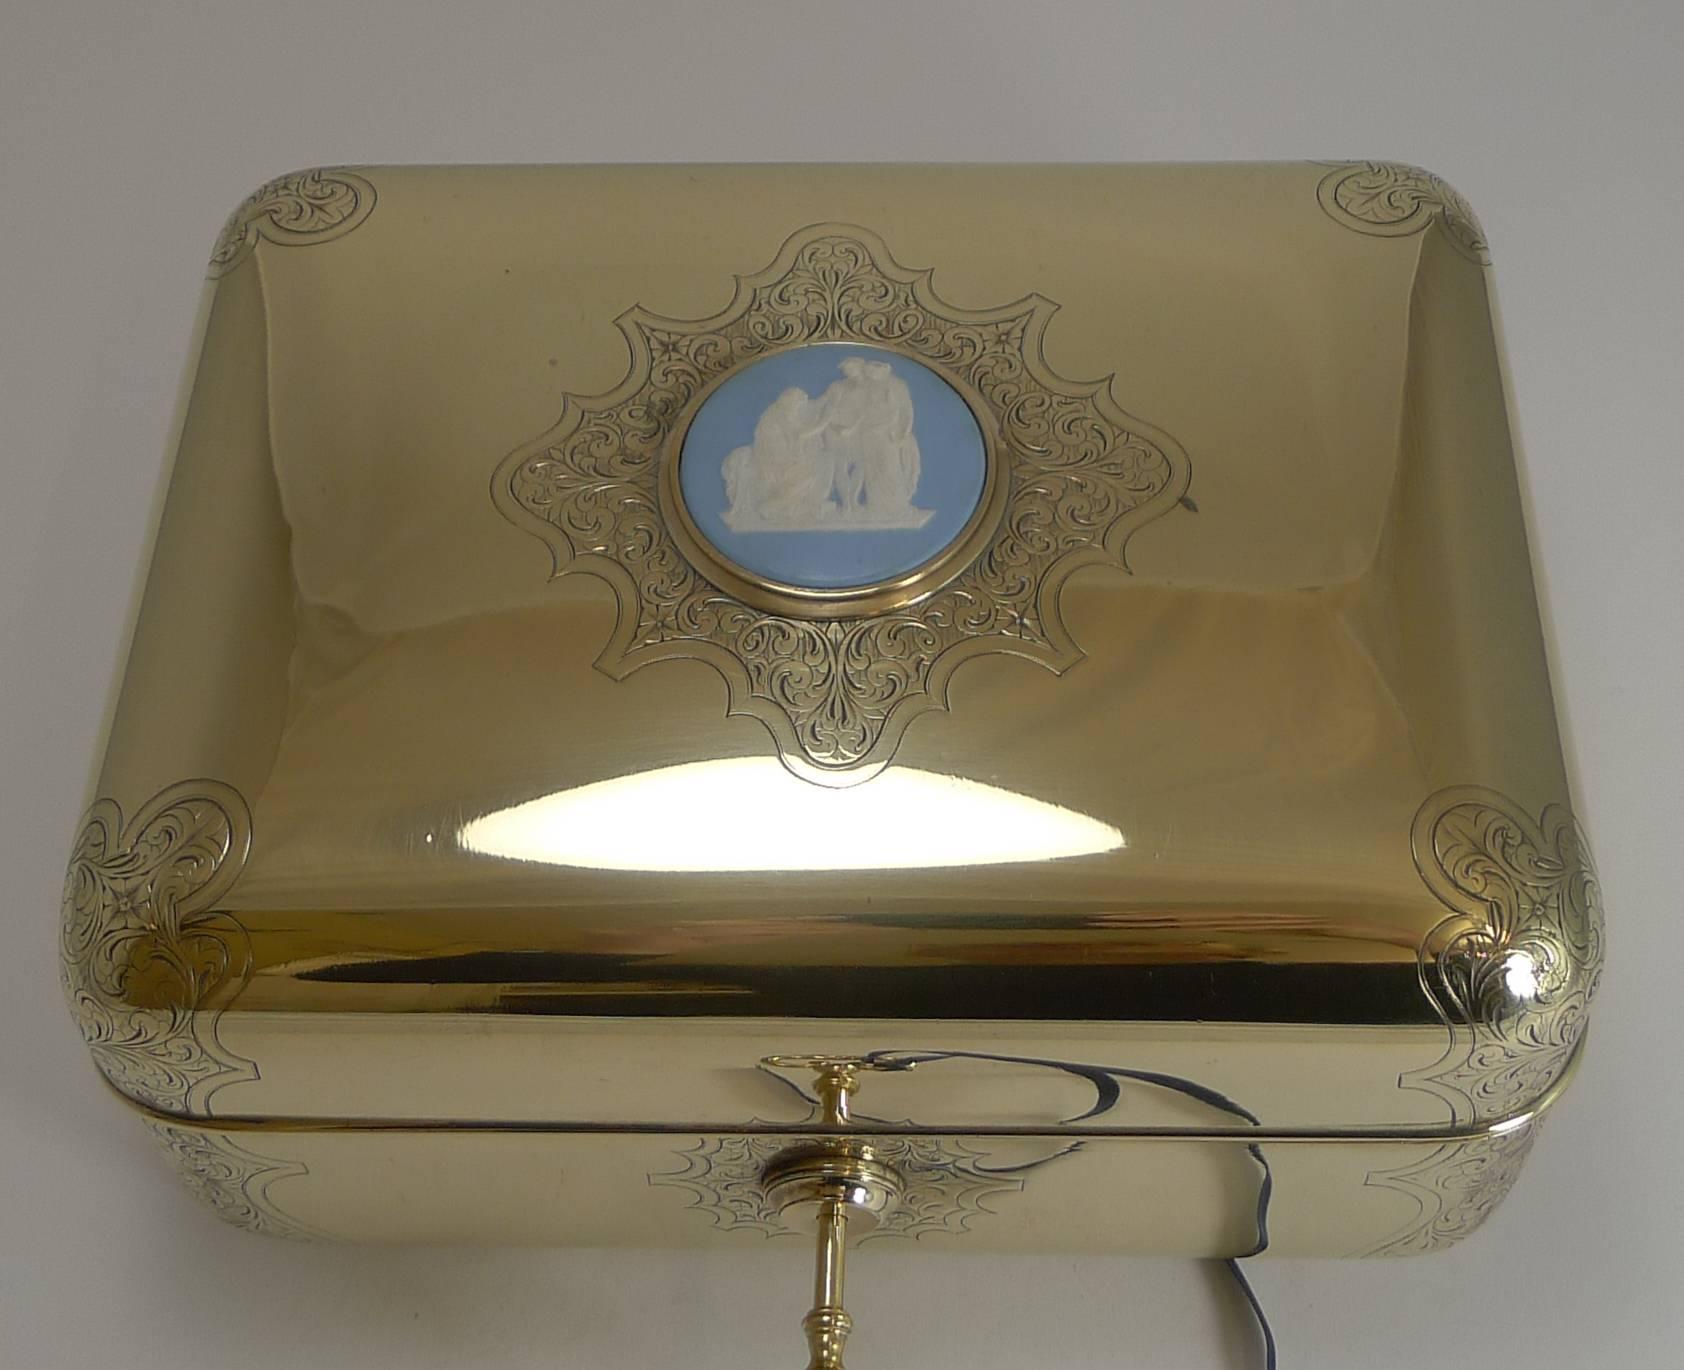 A magnificent top quality and very heavy jewelry casket or box made from cast bronze or brass, polished to gleam.

The box with it's rounded corners has beautiful panels of hand engraved decoration and a Wedgwood jasper plaque inset in the centre